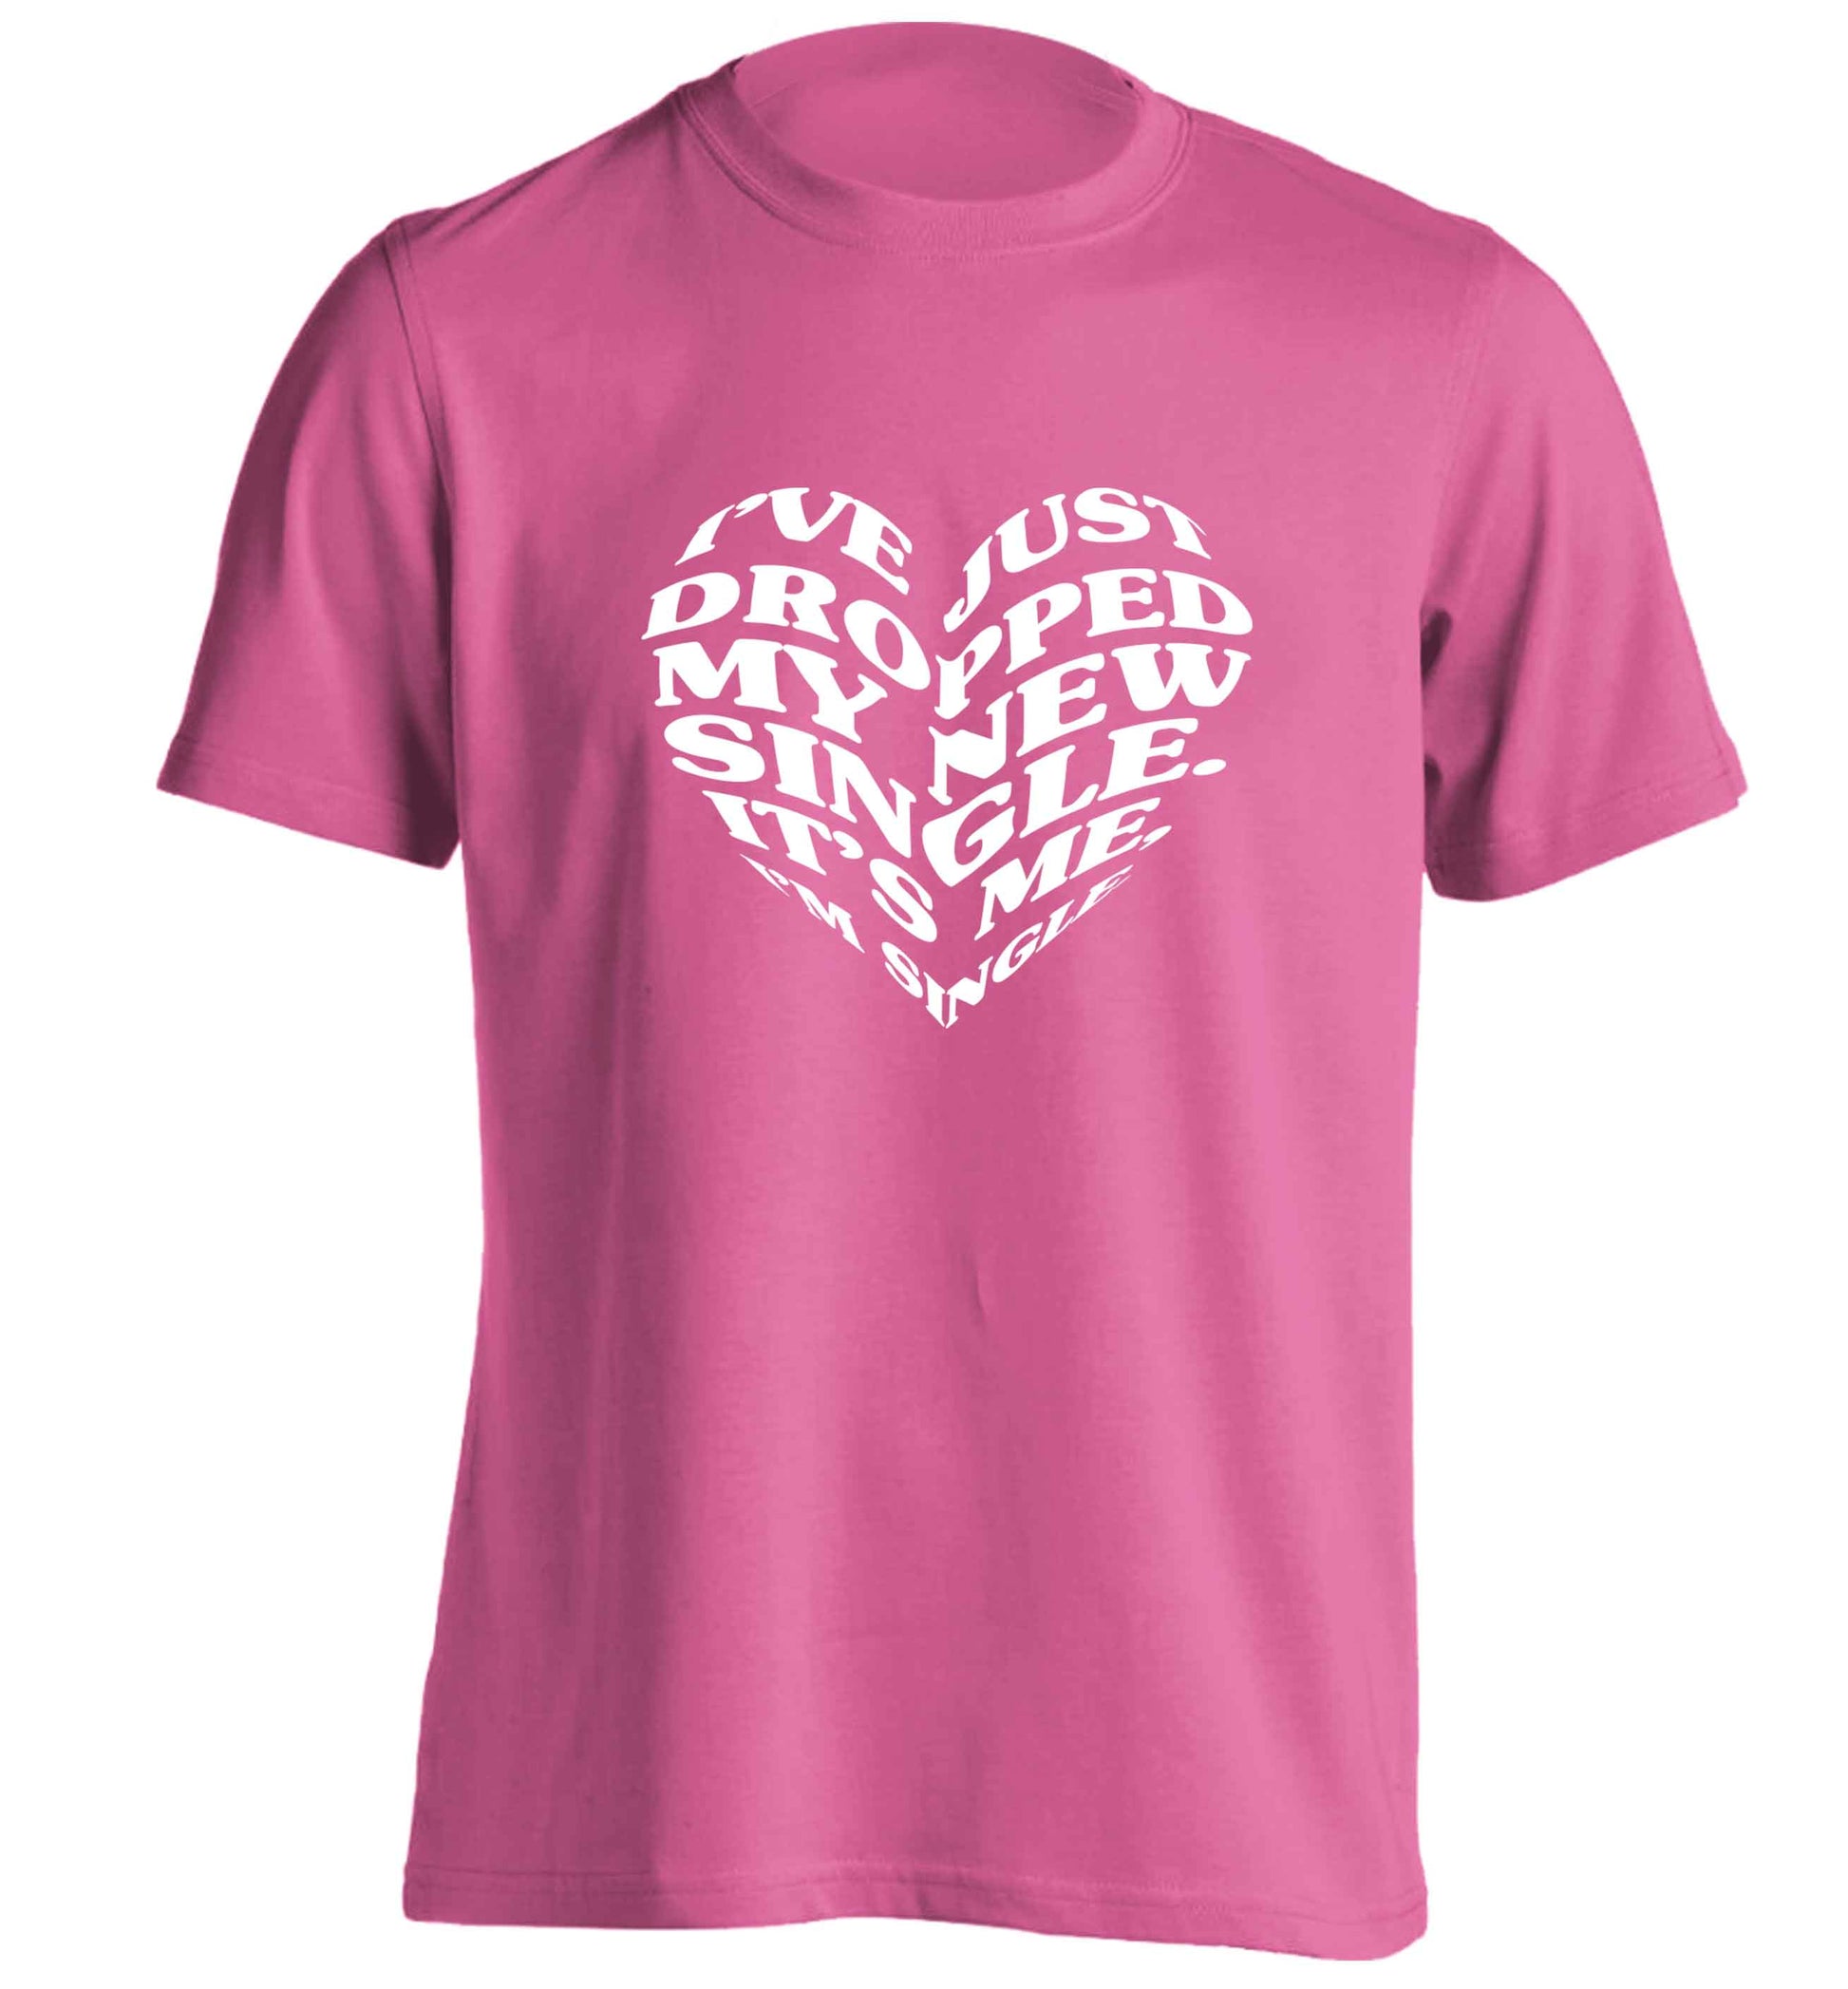 I've just dropped my new single it's me I'm single adults unisex pink Tshirt 2XL